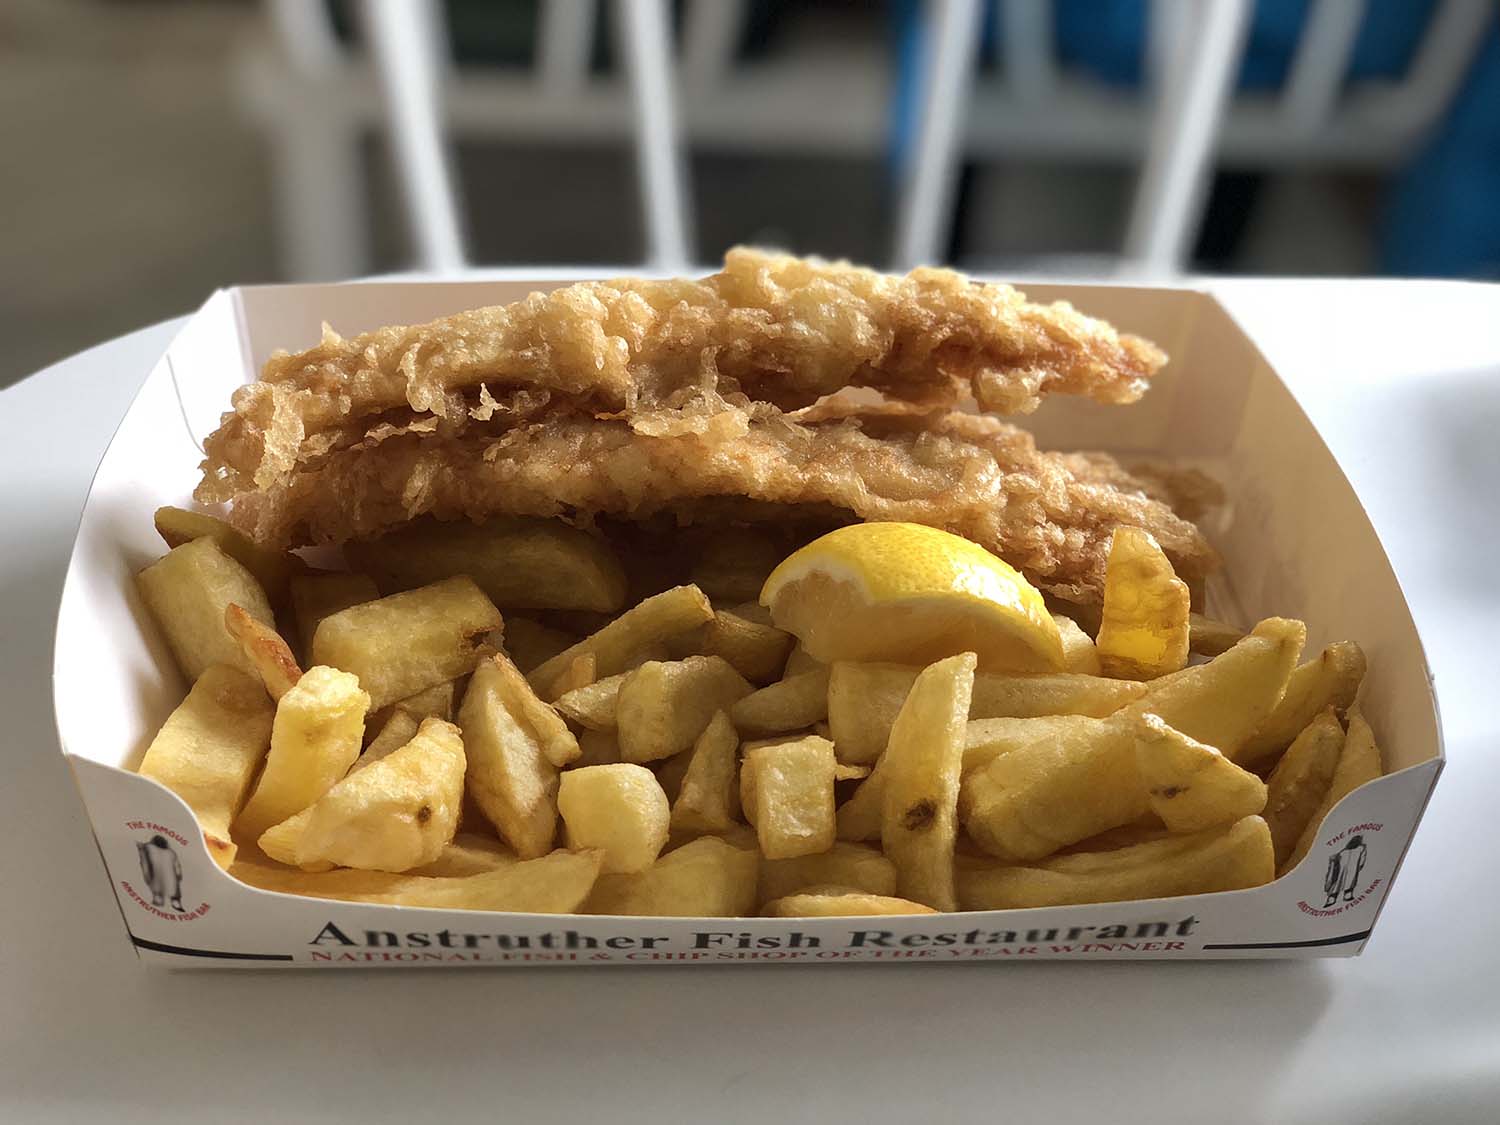 Anstruther Best fish & Chips St Andrews